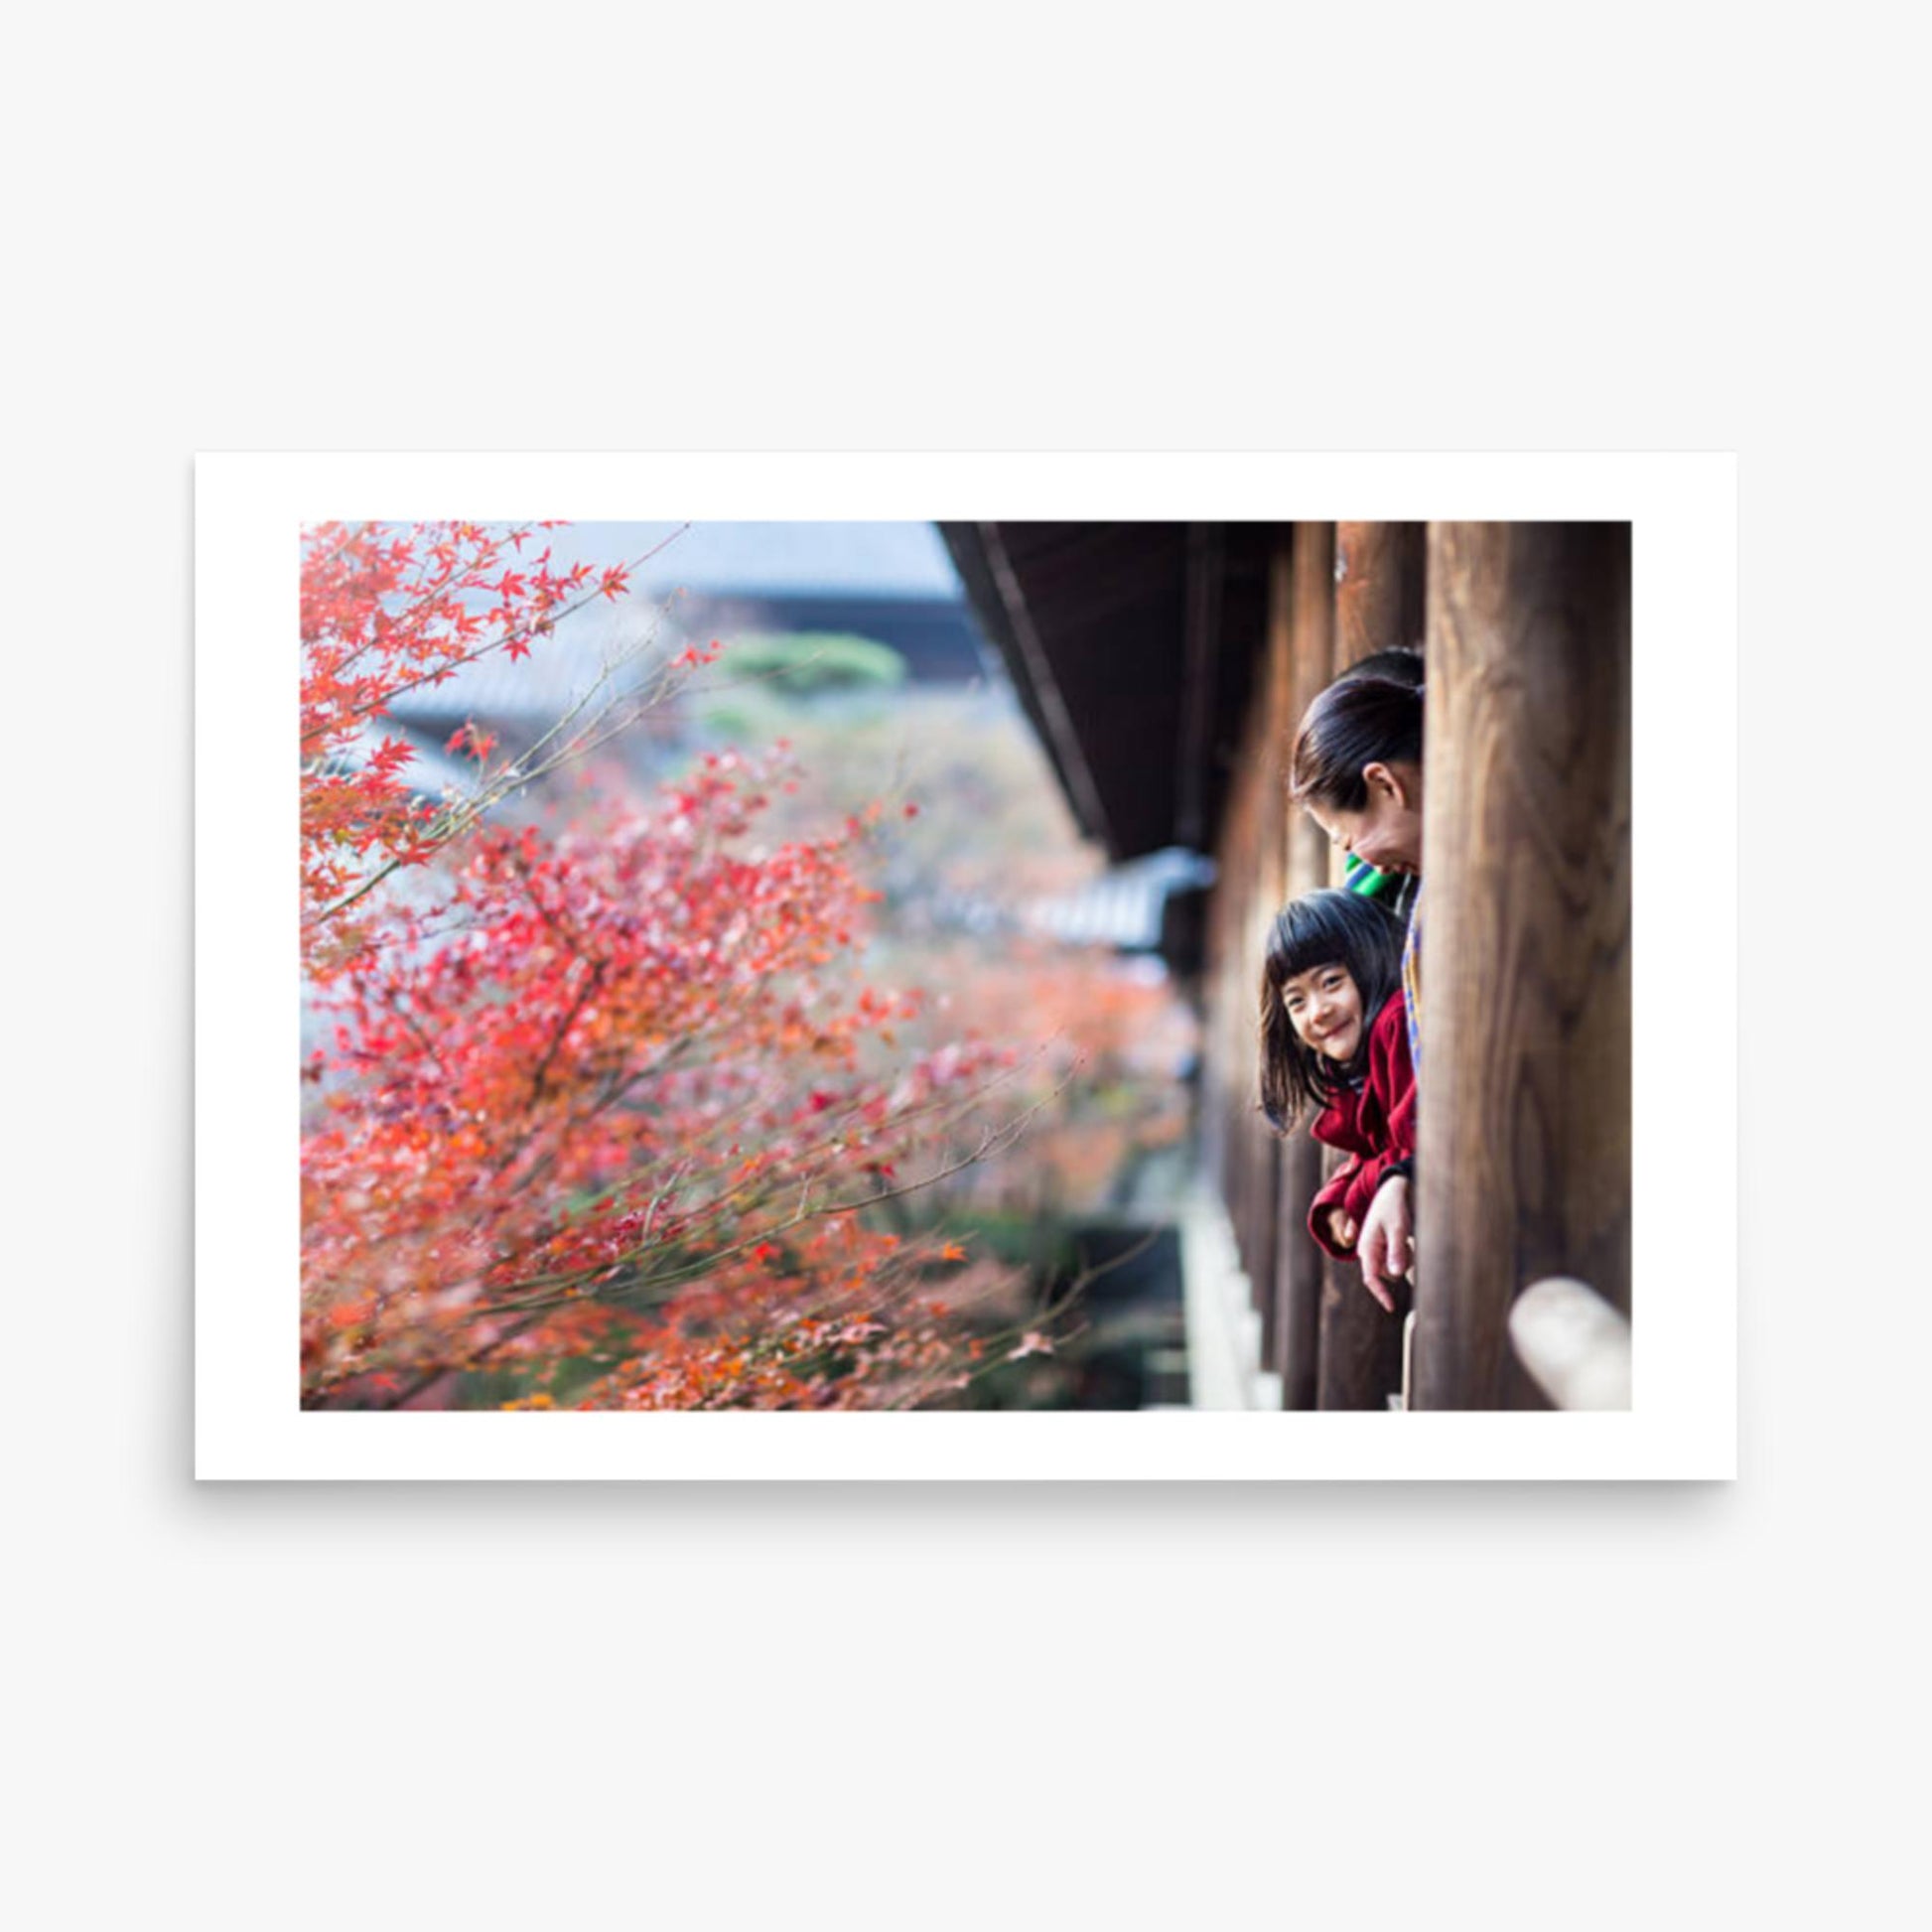 Father, mother and daughter at a temple enjoying autumn leaves 24x36 in Poster